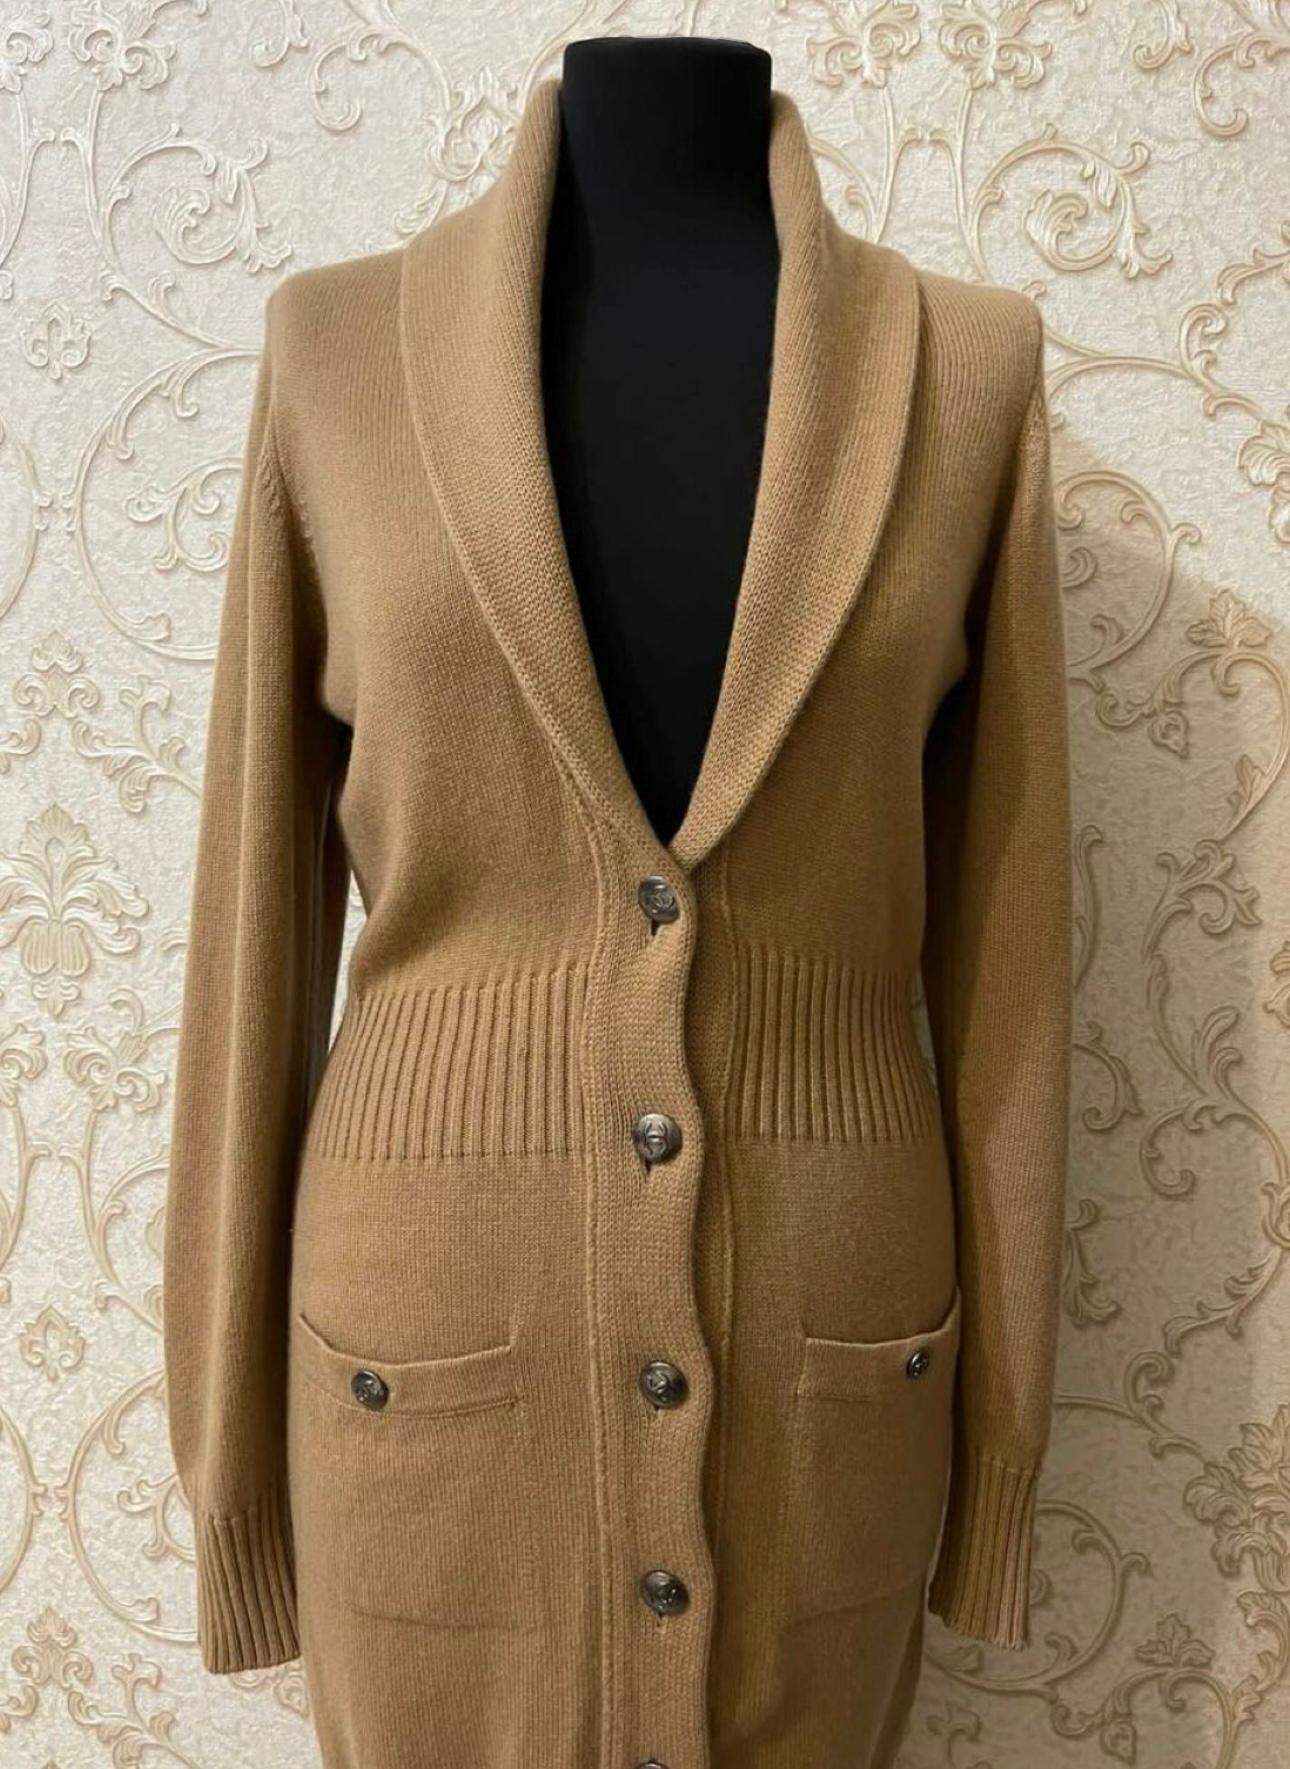 Chanel Claudia Schiffer Style Camel Cashmere Cardi Coat For Sale 1